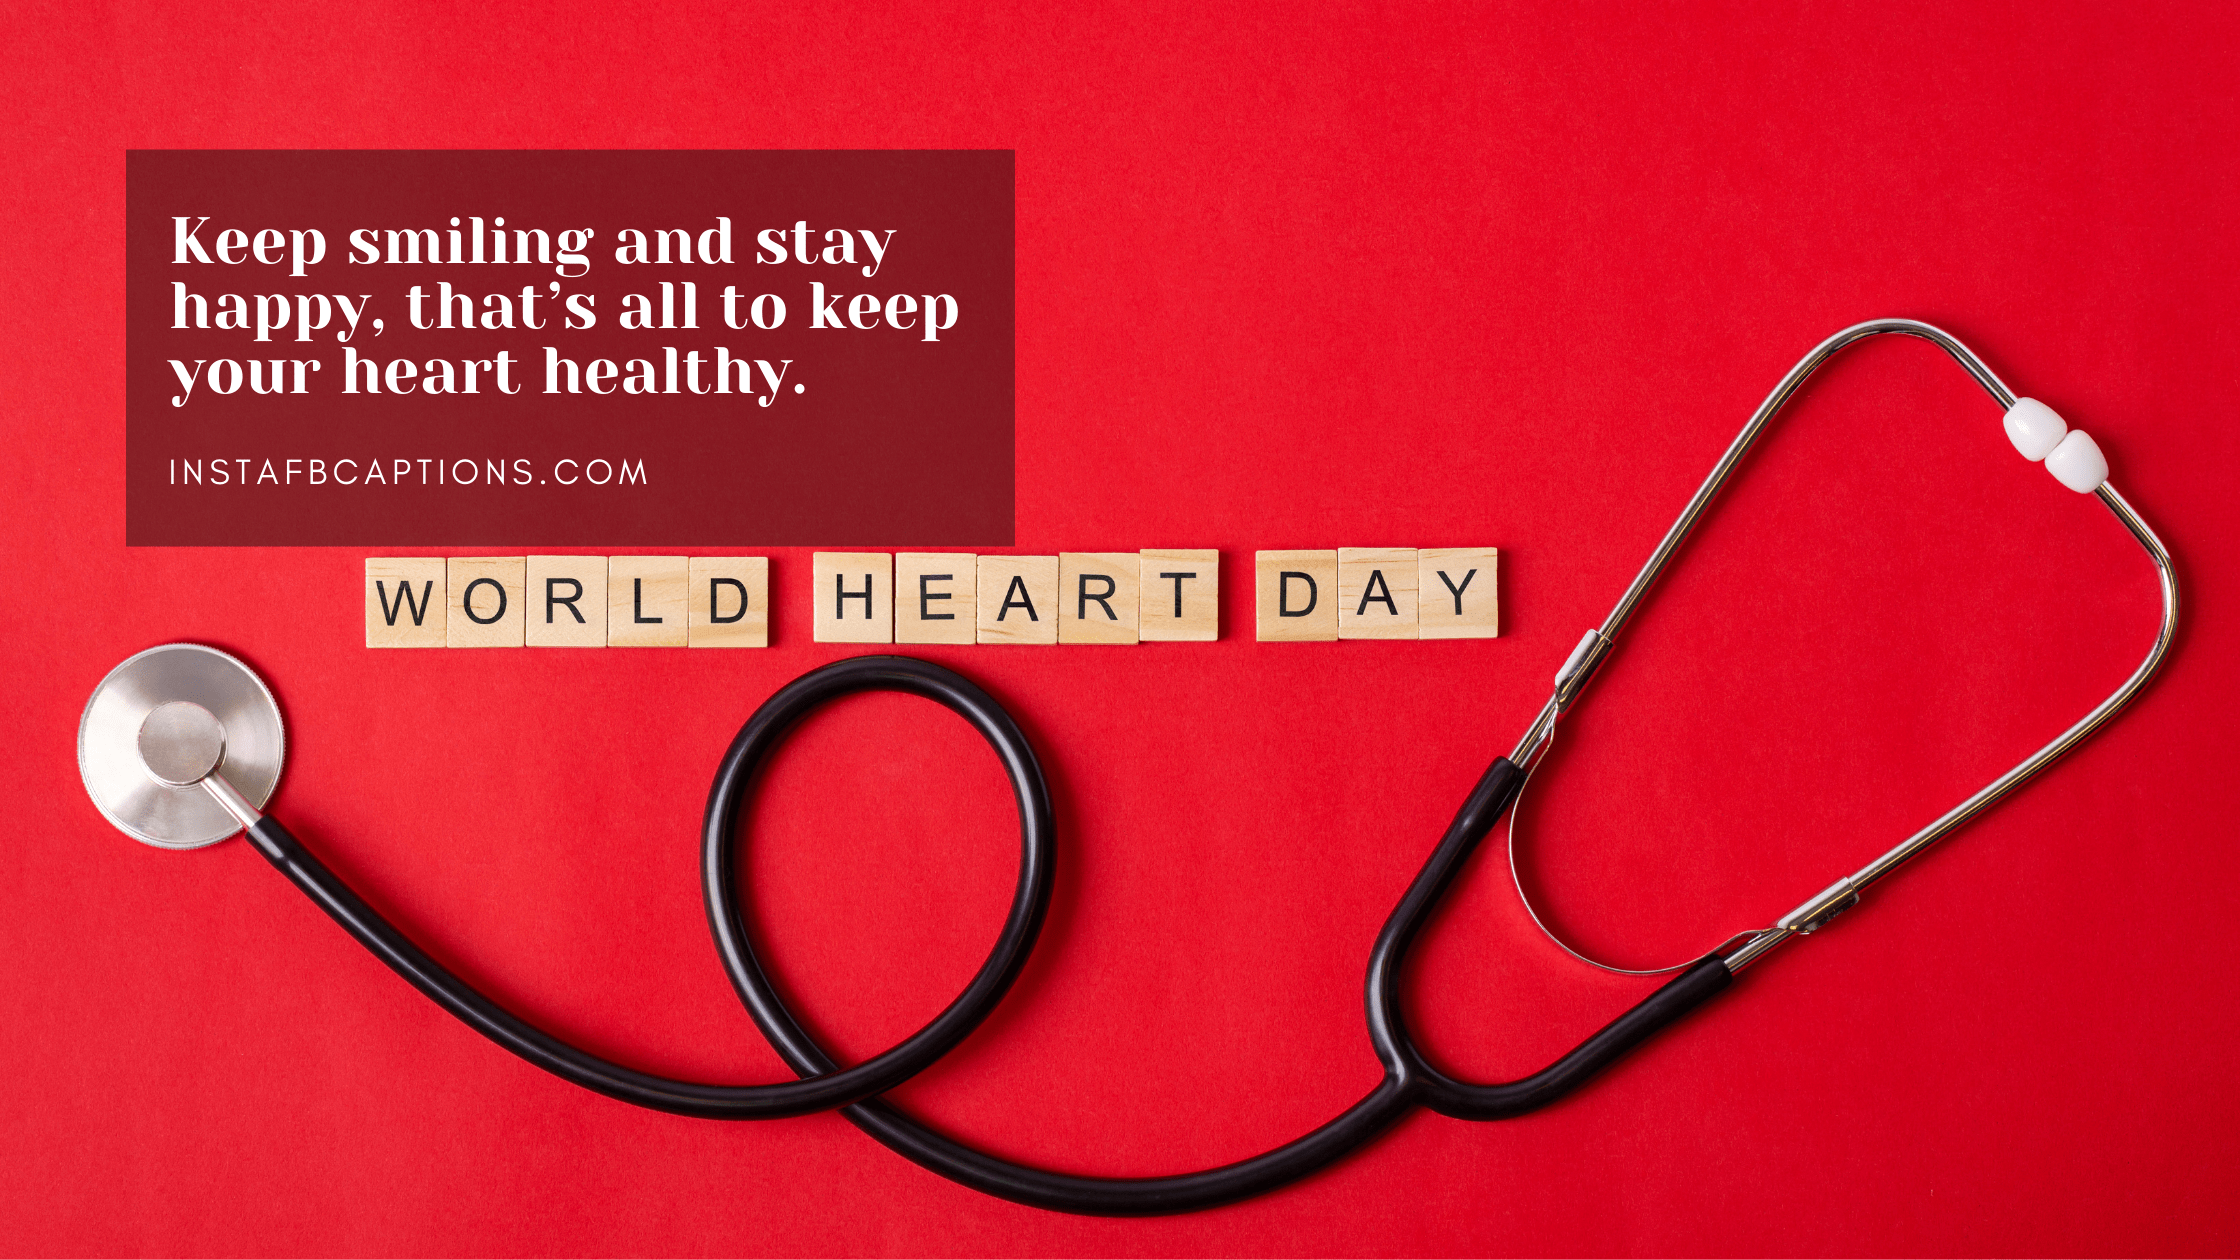 Some Of The Best World Heart Day Wishes  - Some of the Best World Heart Day Wishes  - 99 World Heart Day Captions, Quotes, Wishes in 2022